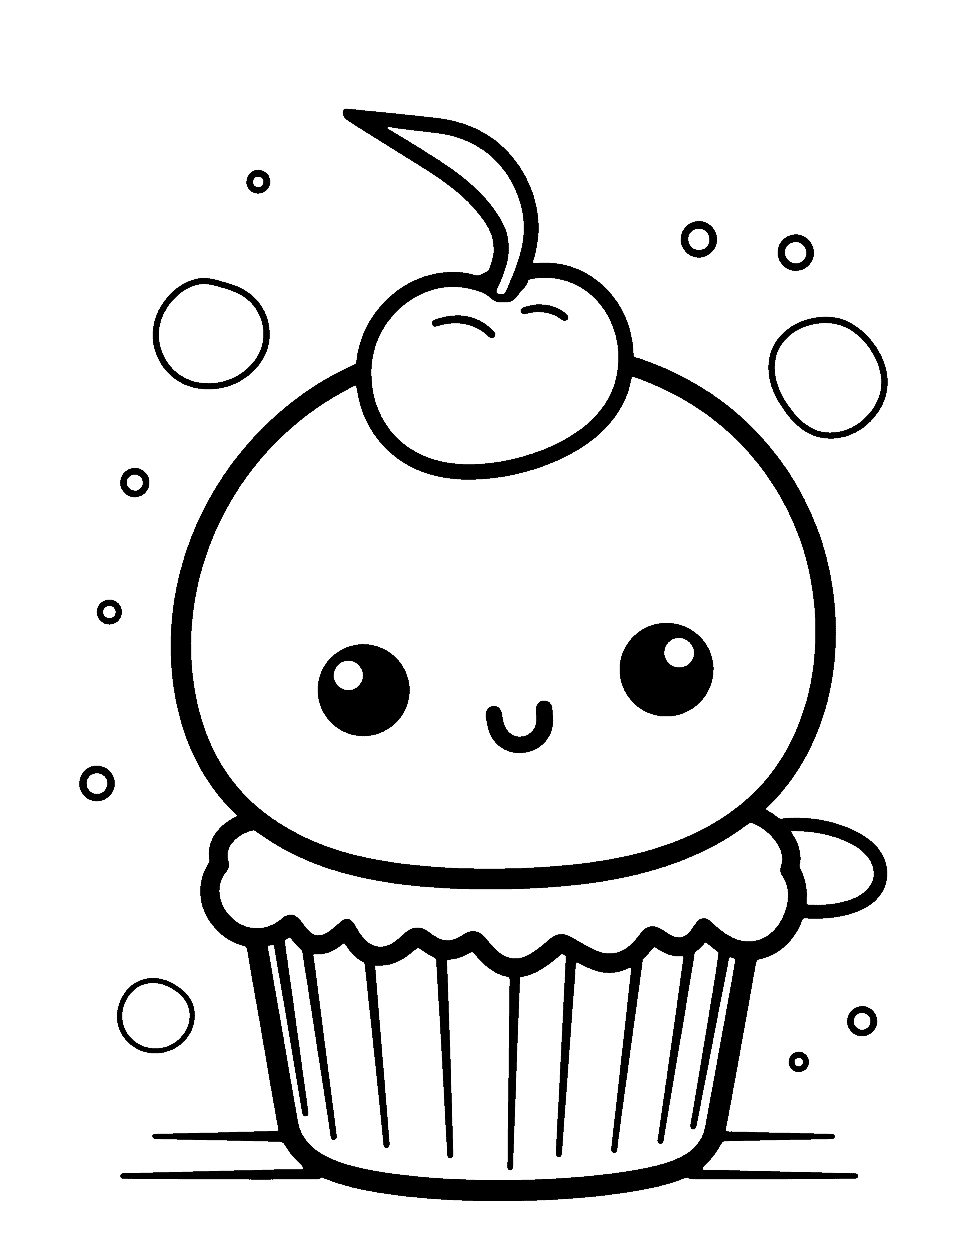 Kawaii Cupcake Surprise Coloring Page - An adorable cupcake with cute facial expressions and a surprise cherry on top.